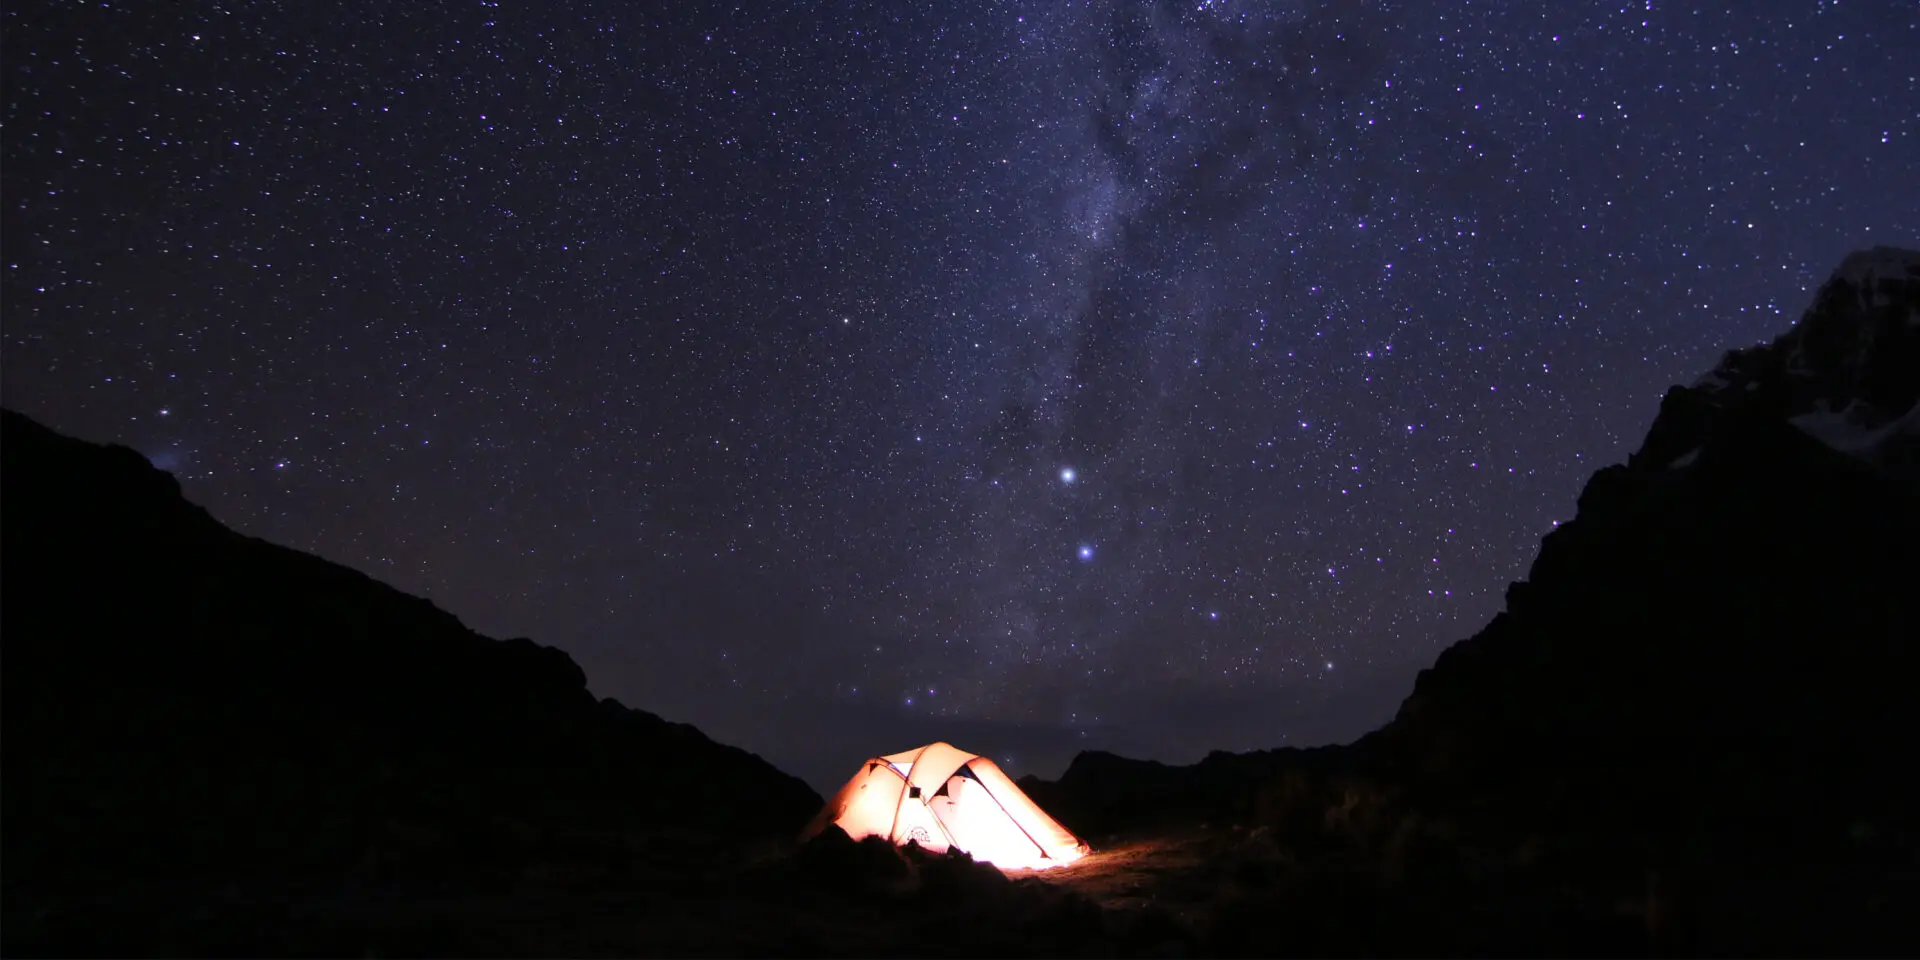 A tent is lit up in the night sky.